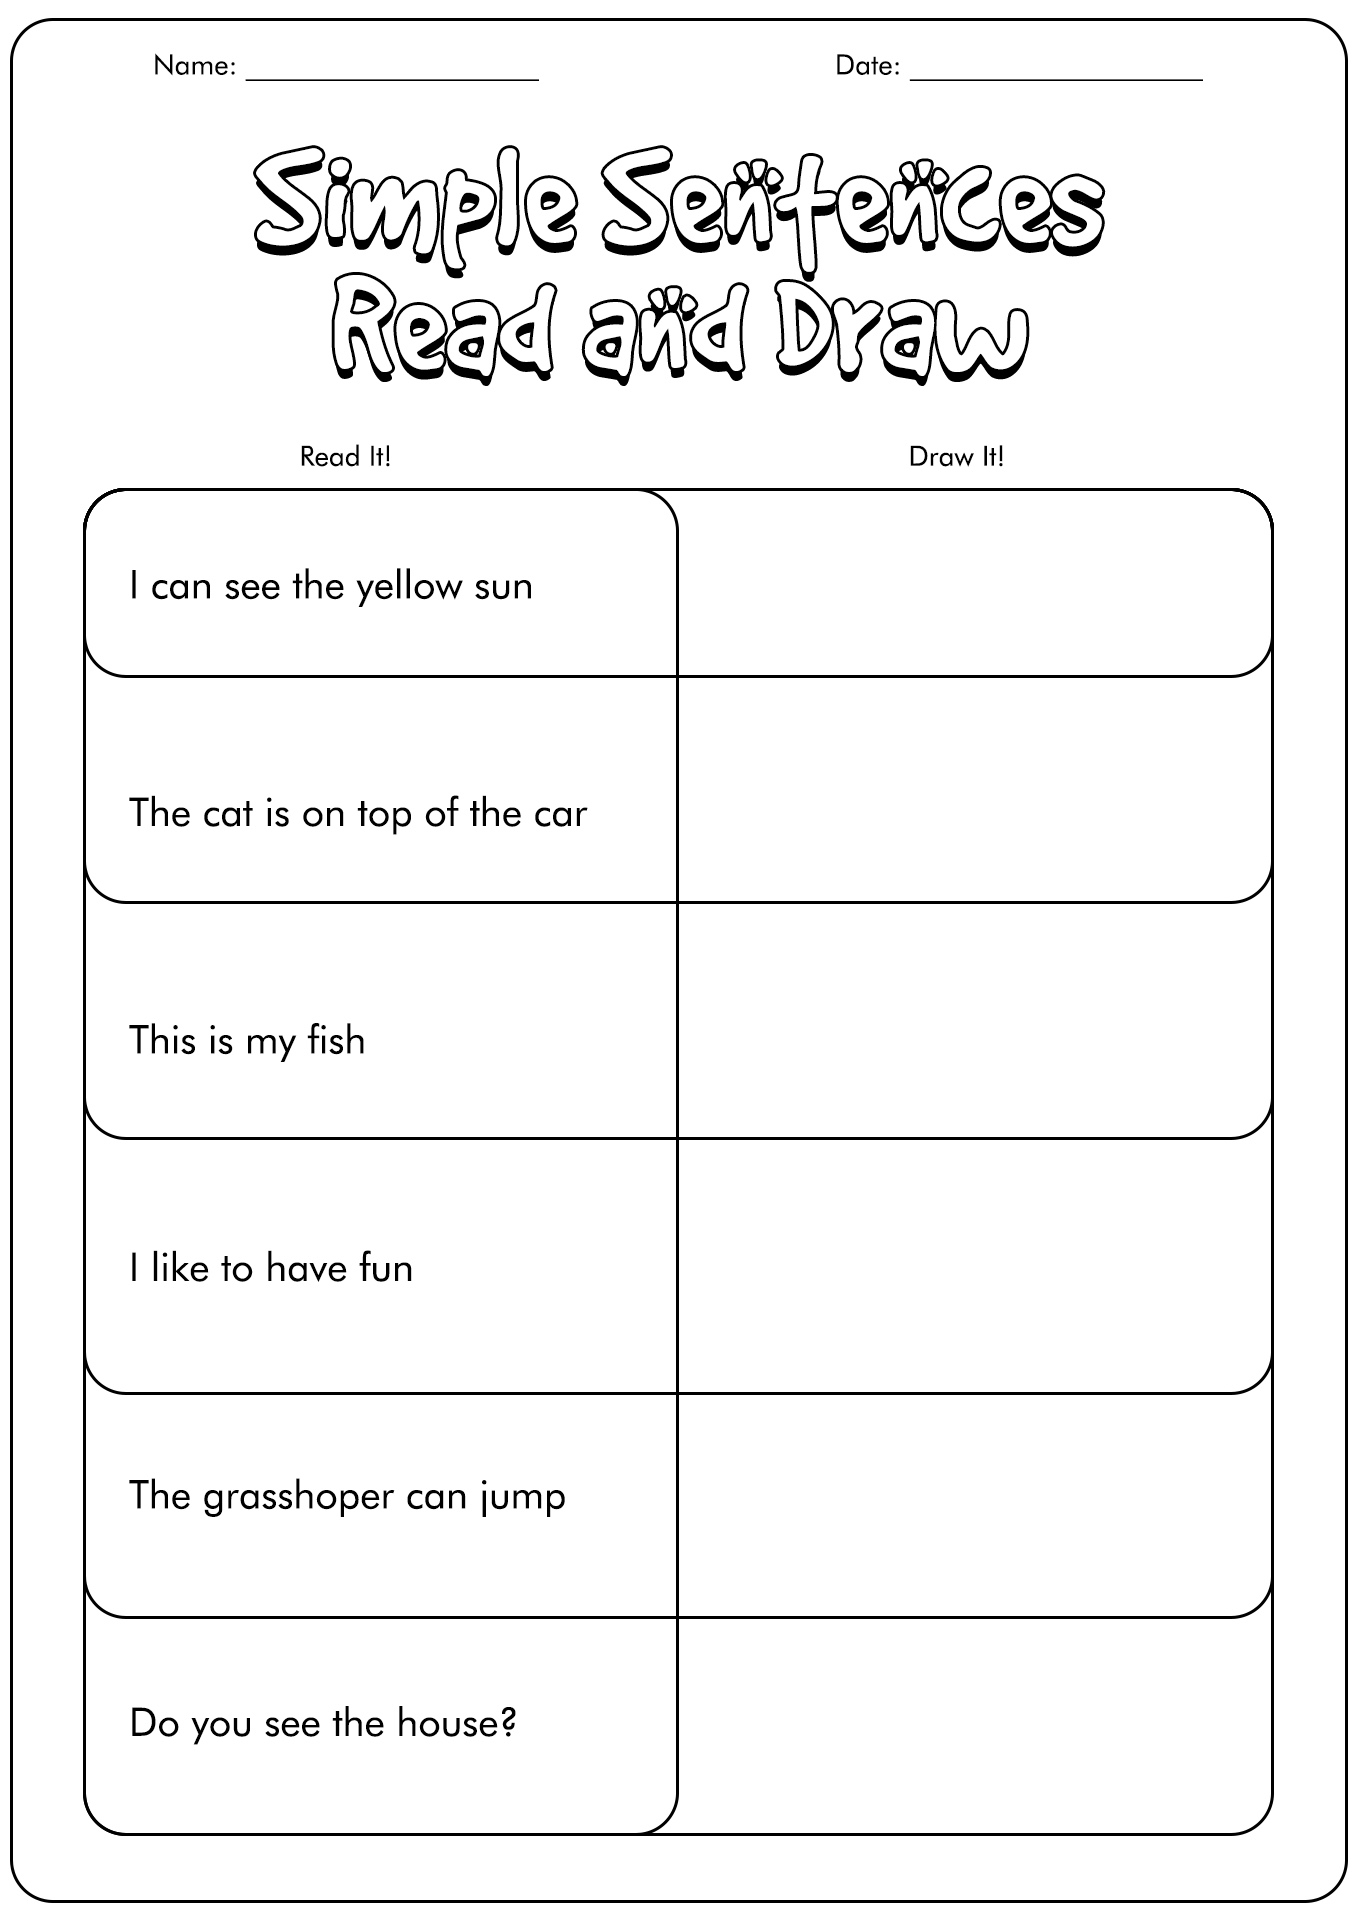 Read Draw and Simple Sentences